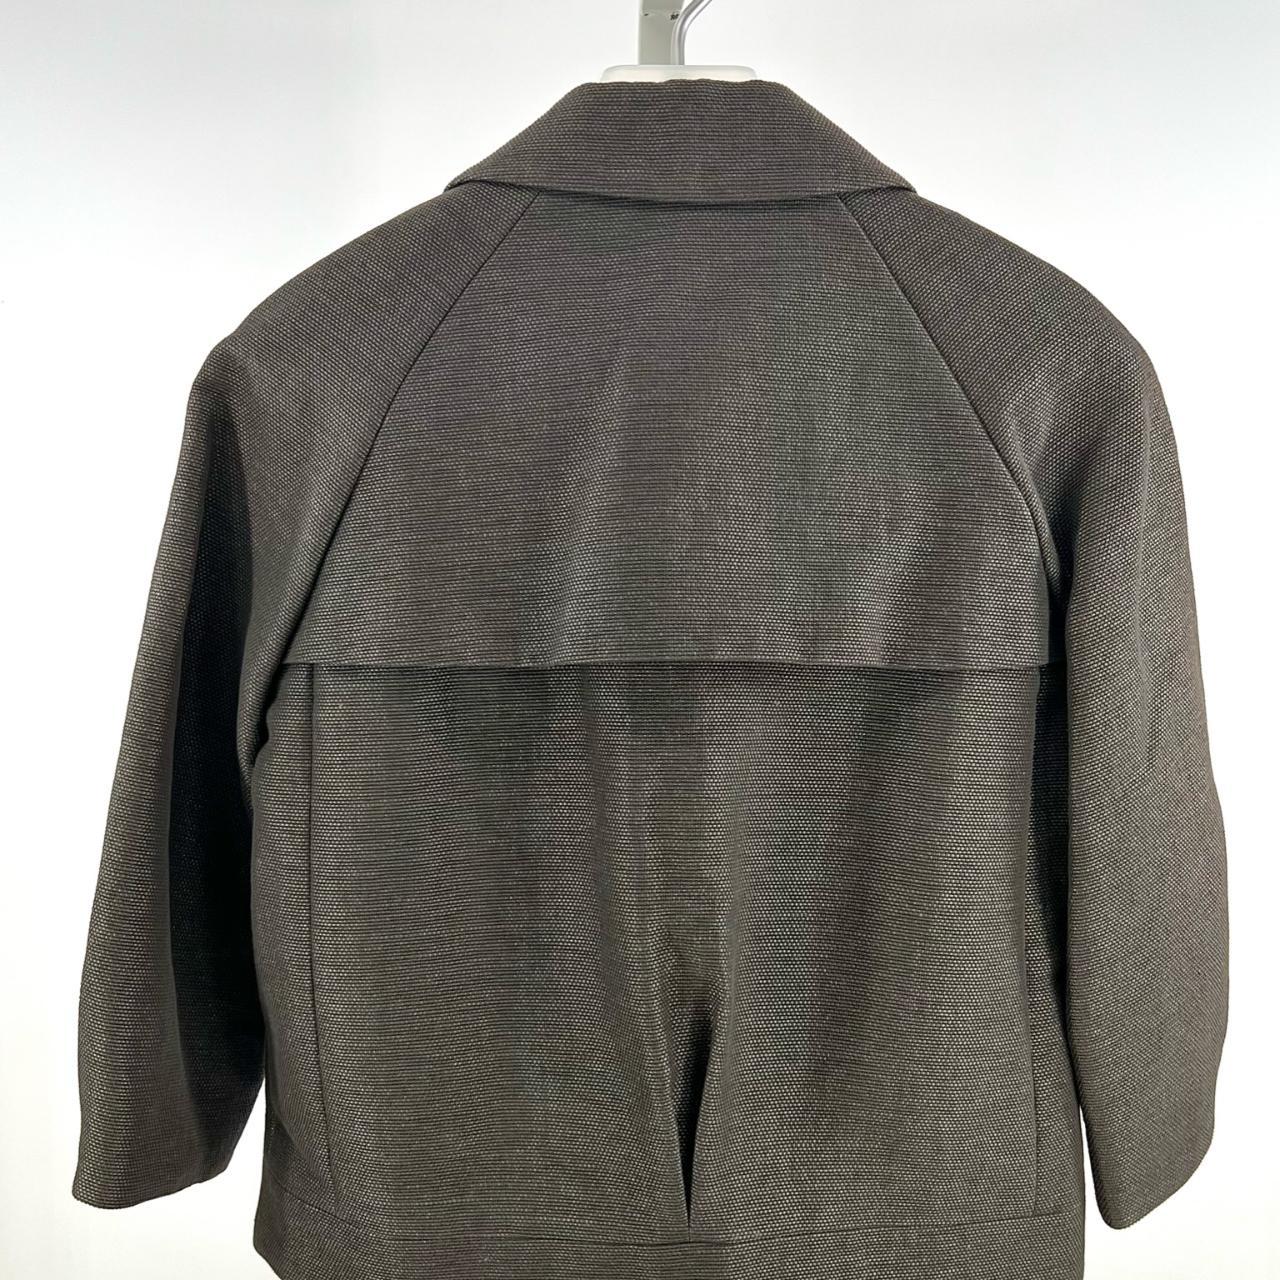 Product Image 2 - Perfect-for-Spring gray cropped jacket from